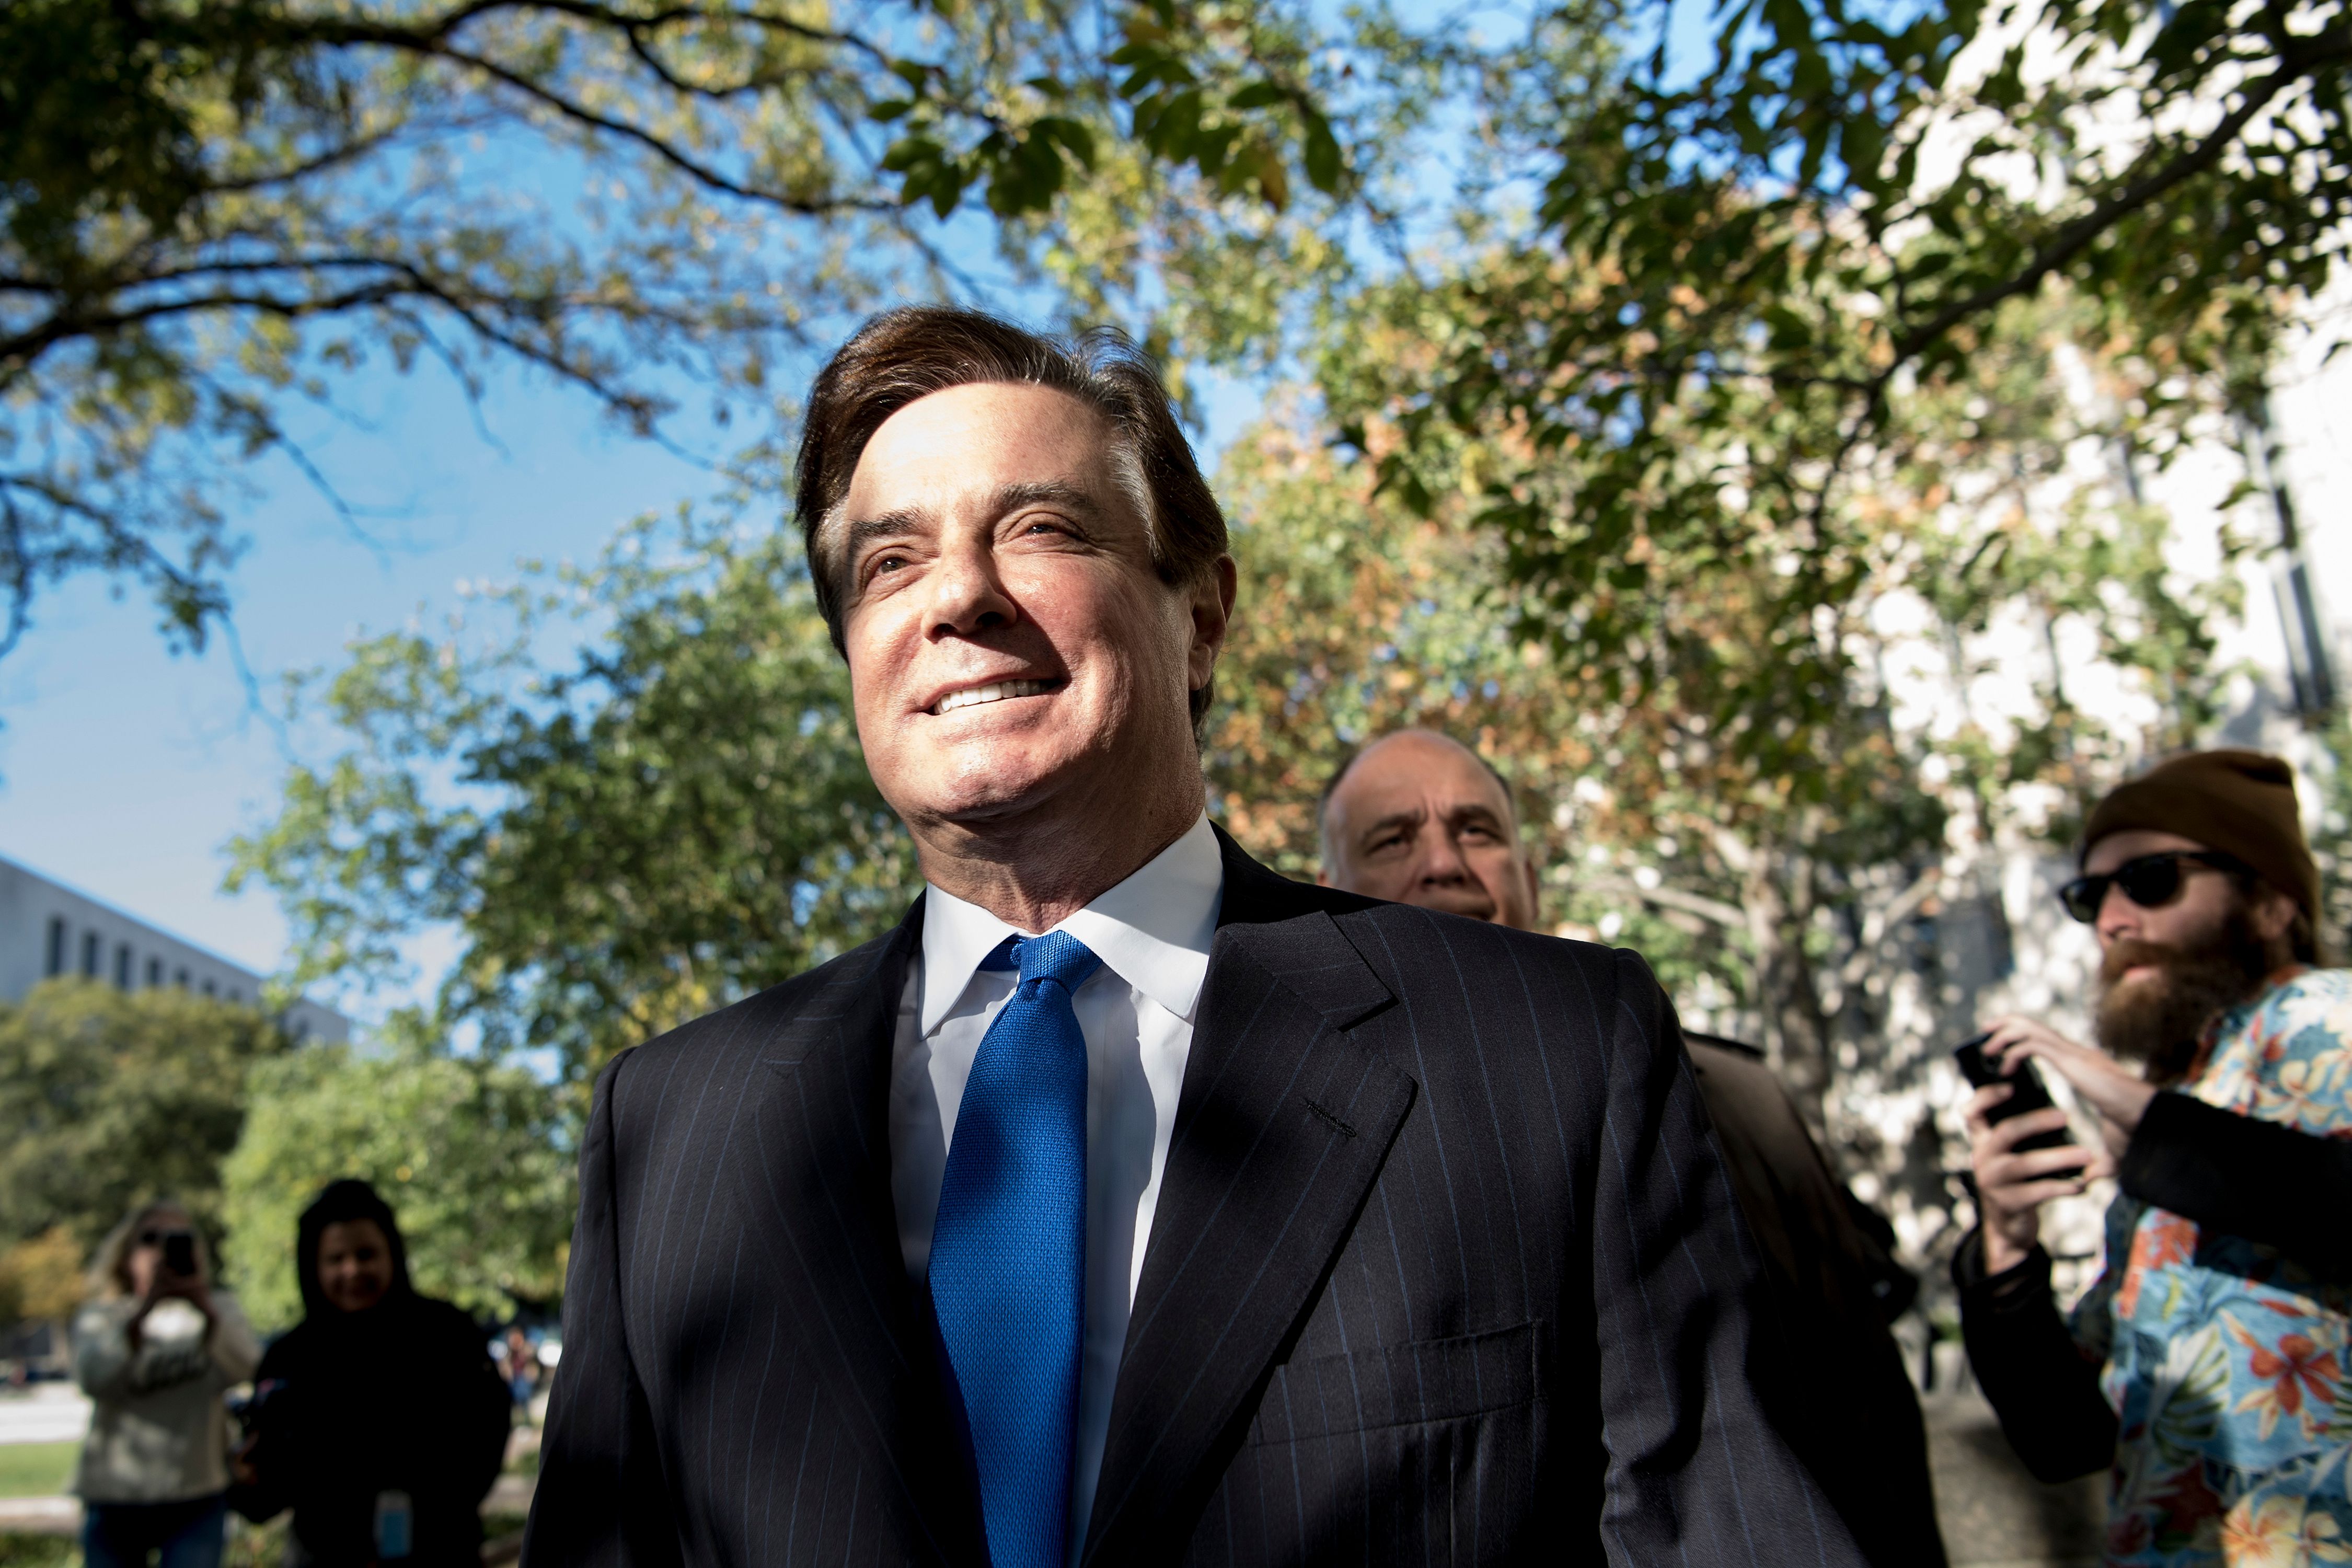 Paul Manafort walks outside the William B. Bryant US Courthouse Annex on October 30. (Brendan Smialowski/AFP —Getty Images)